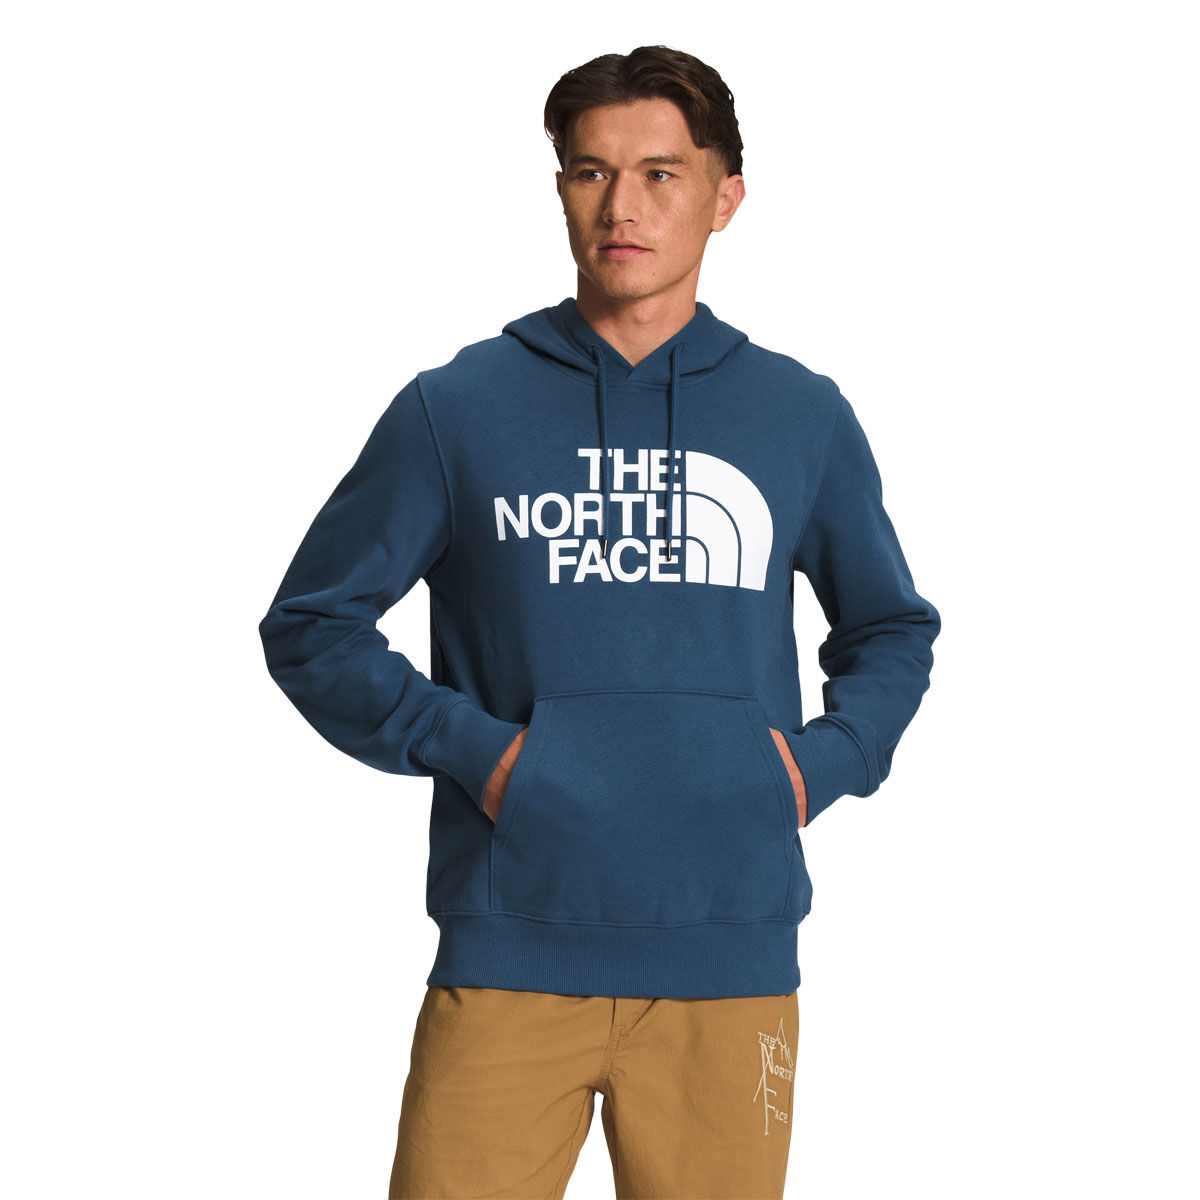 The North Face Men's Clothing - Puffers & more - rebel